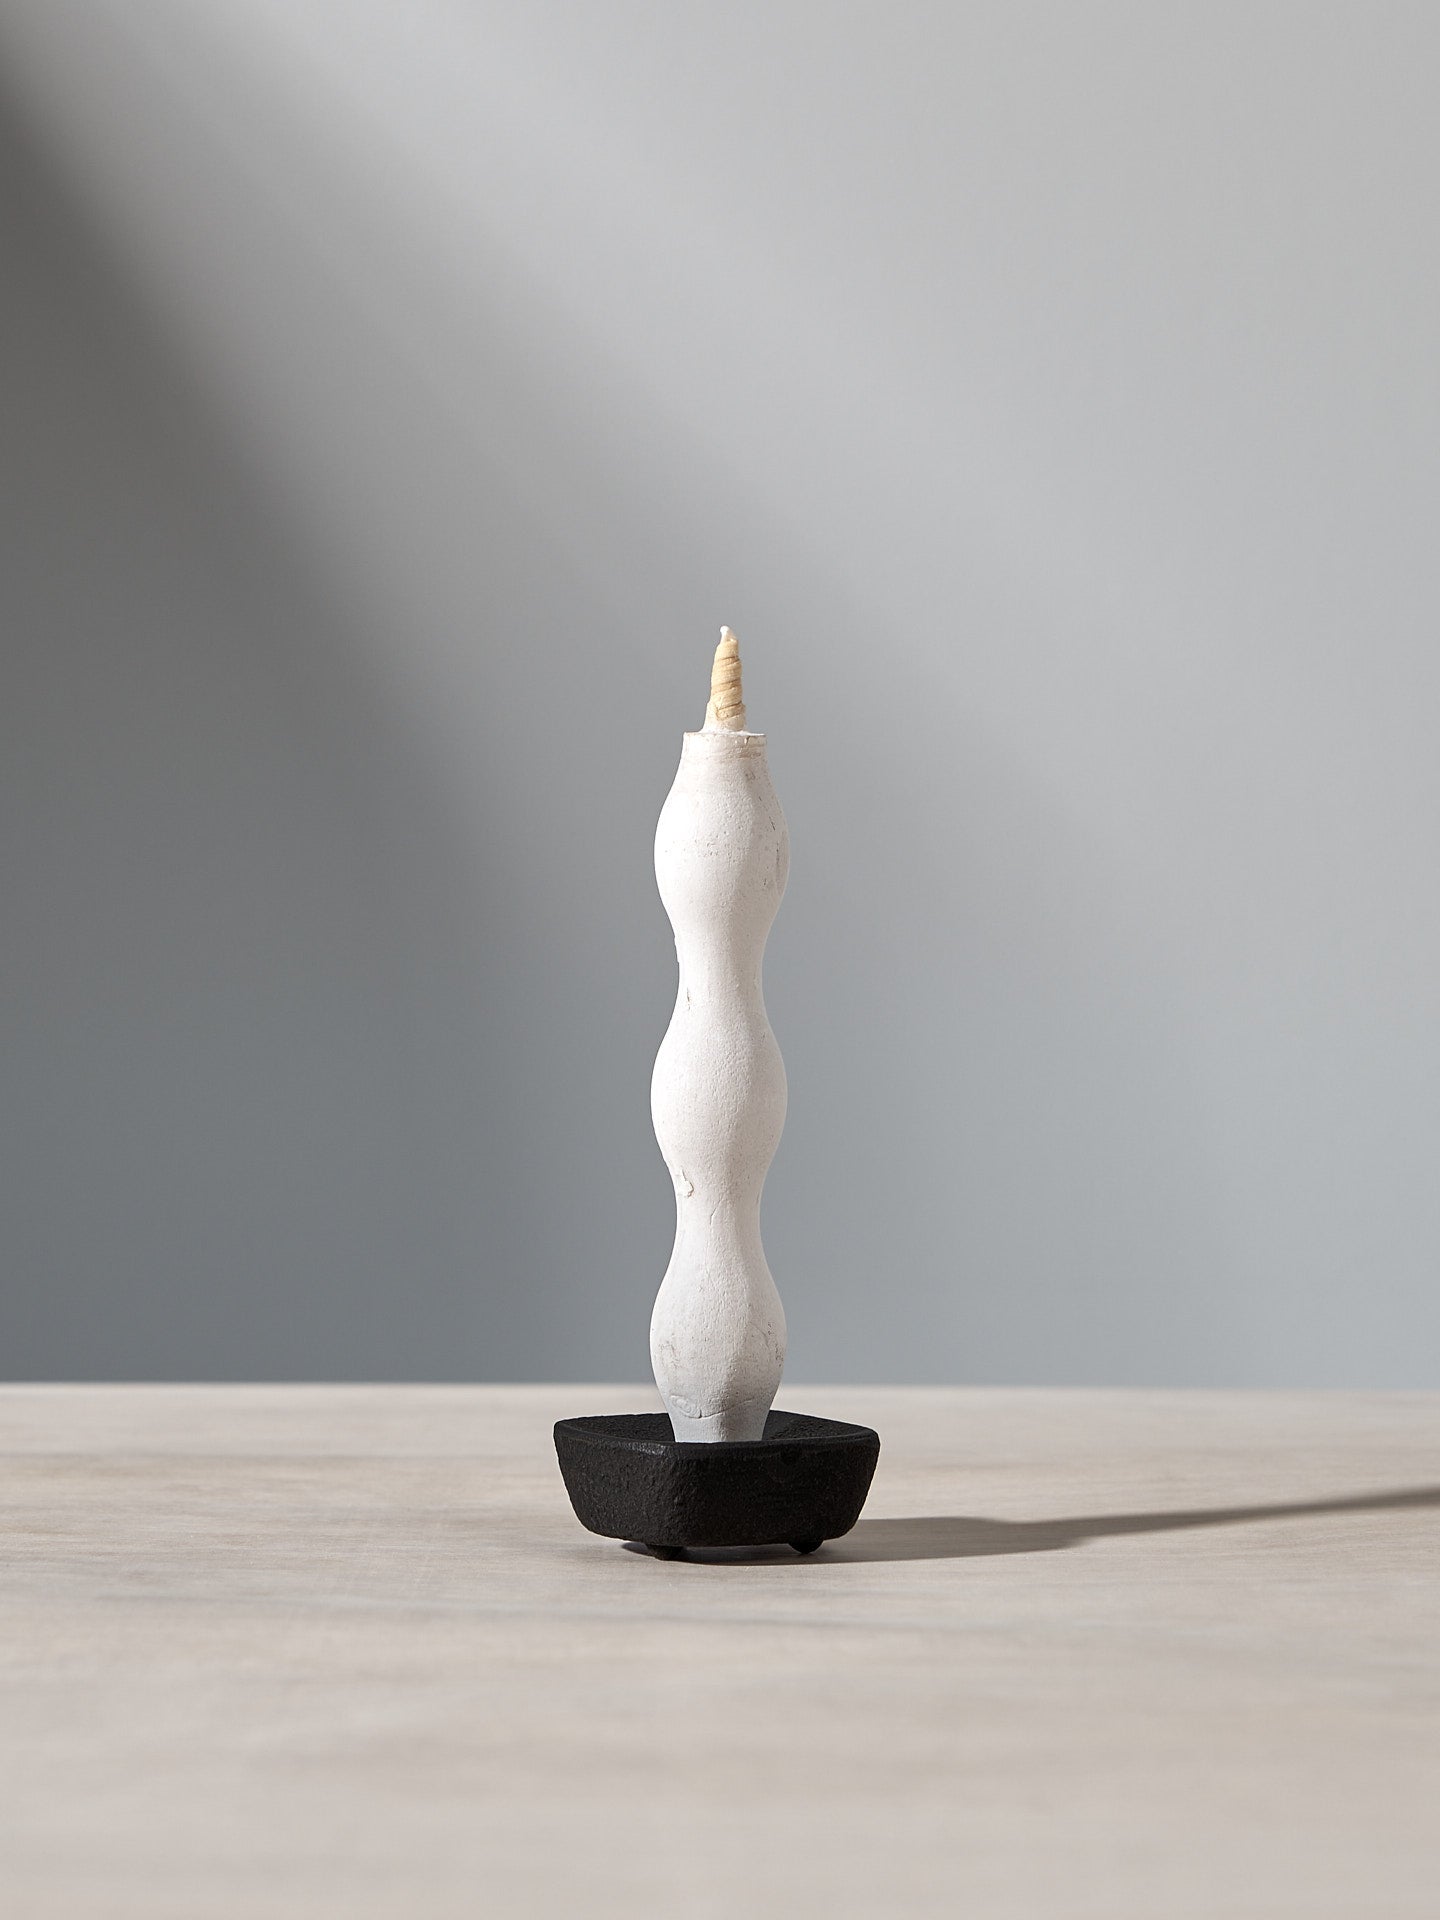 A NANAO-T candle sitting on top of a wooden table by Takazawa.